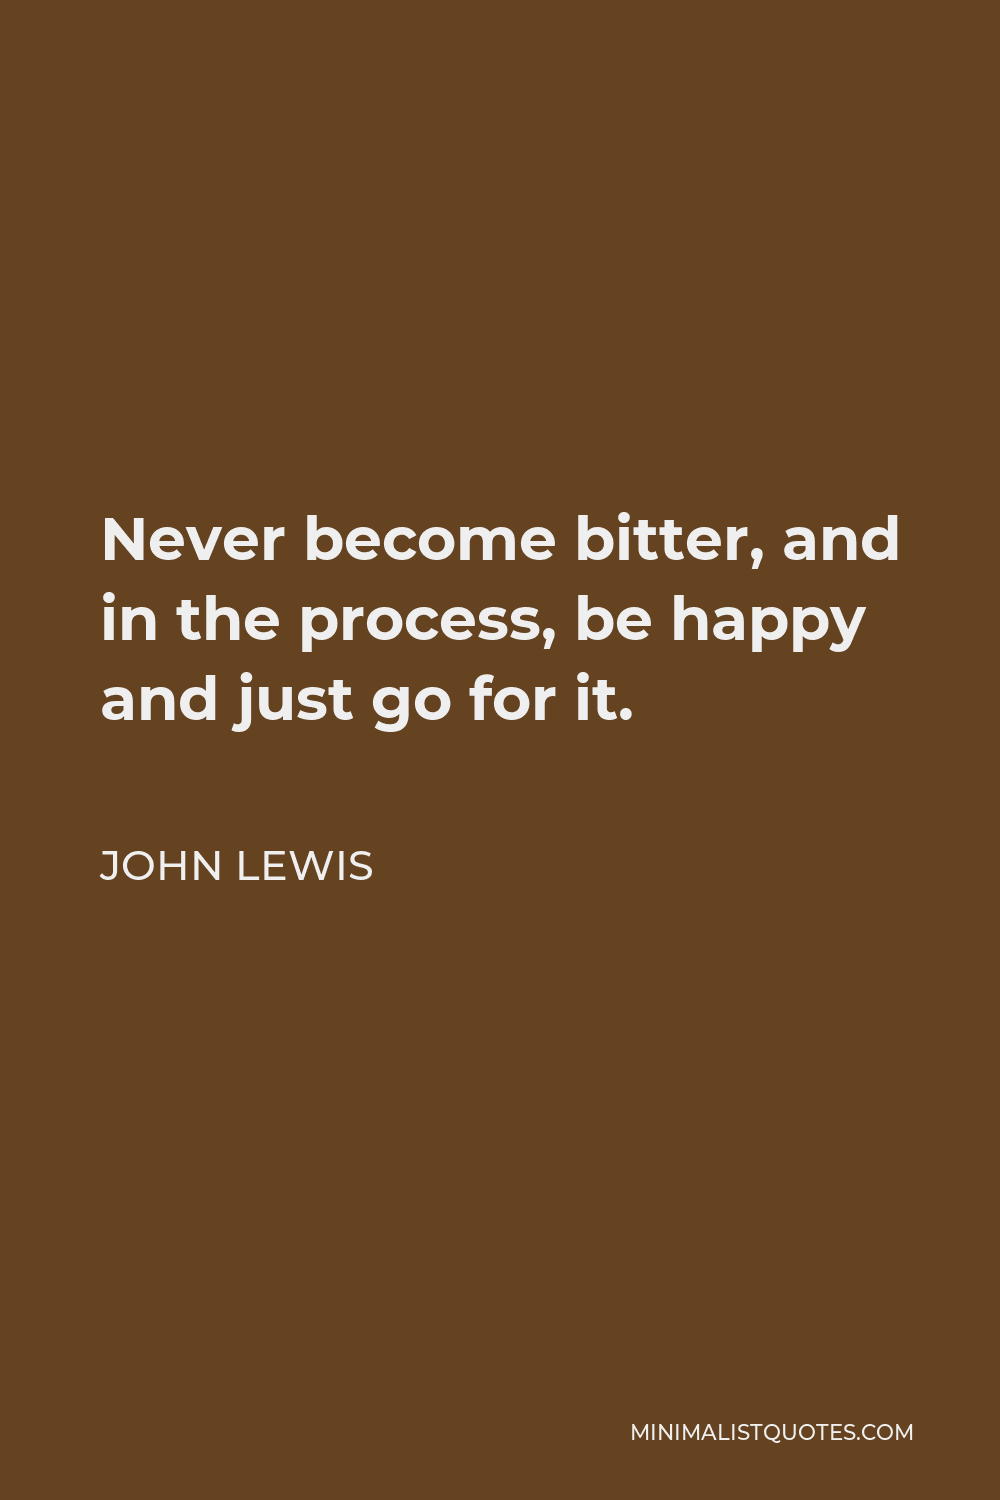 John Lewis Quote - Never become bitter, and in the process, be happy and just go for it.